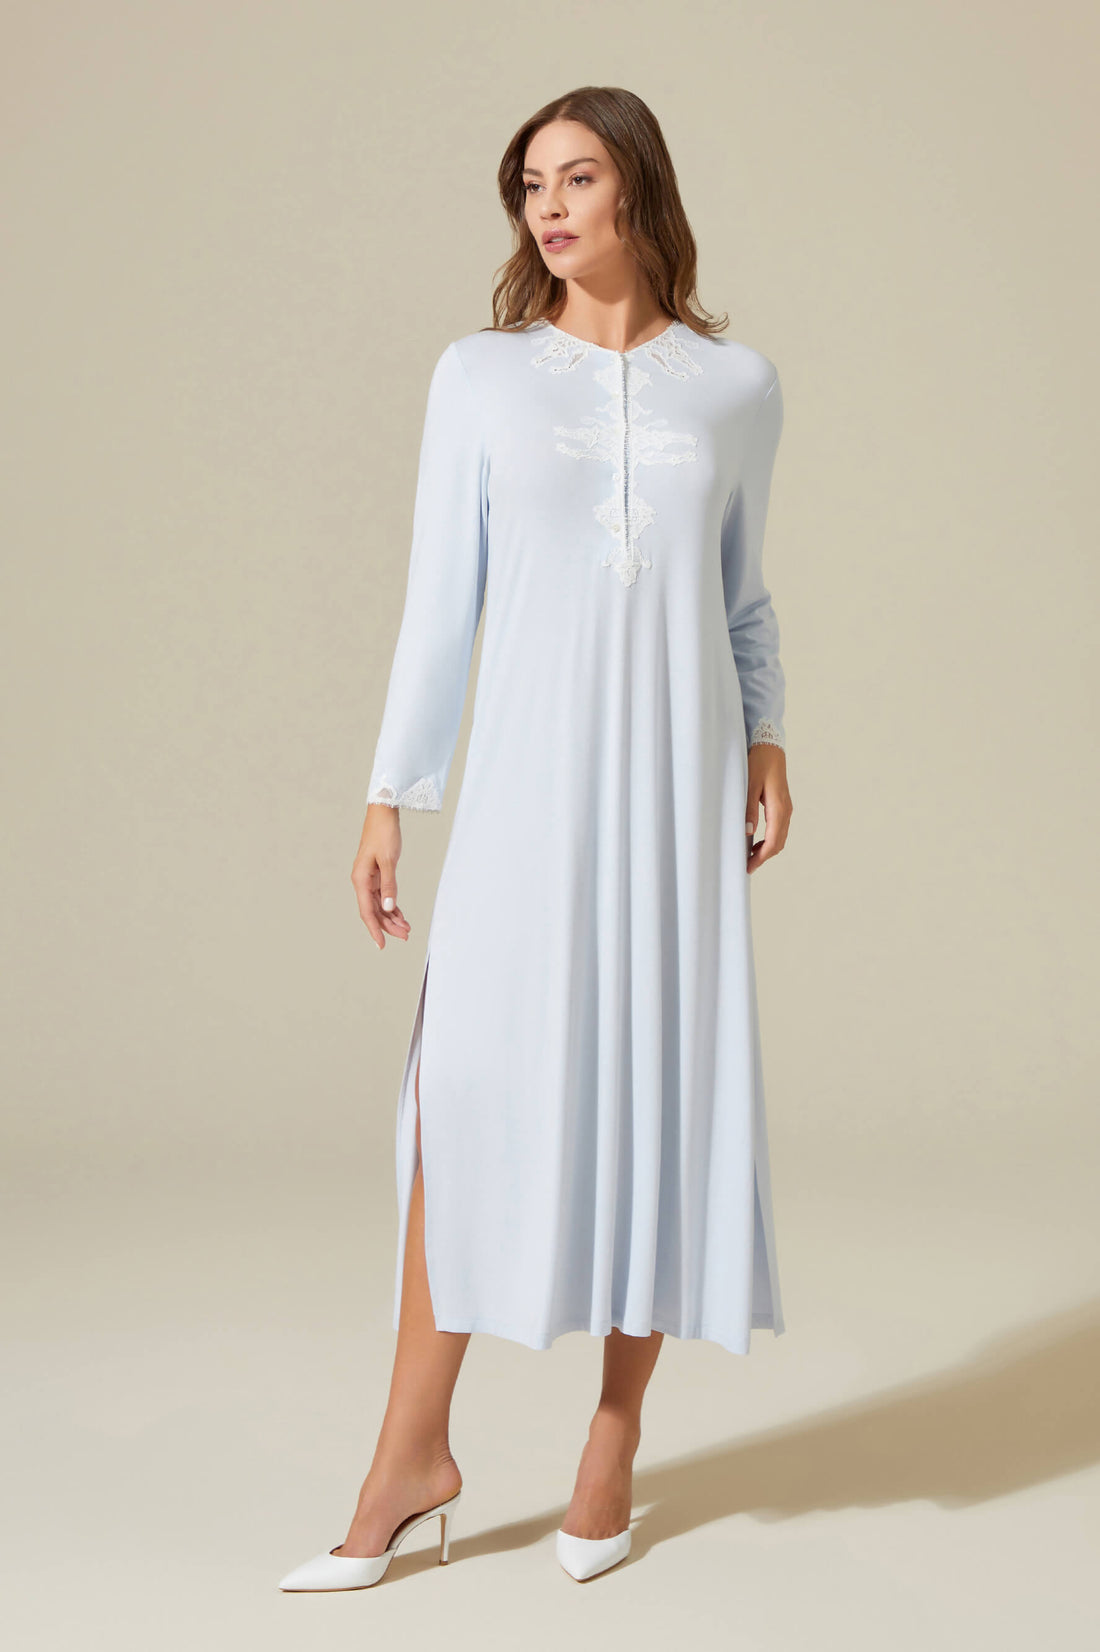 Ciel Trimmed and Buttoned Combed Cotton Nightgown - Off White on Baby Blue